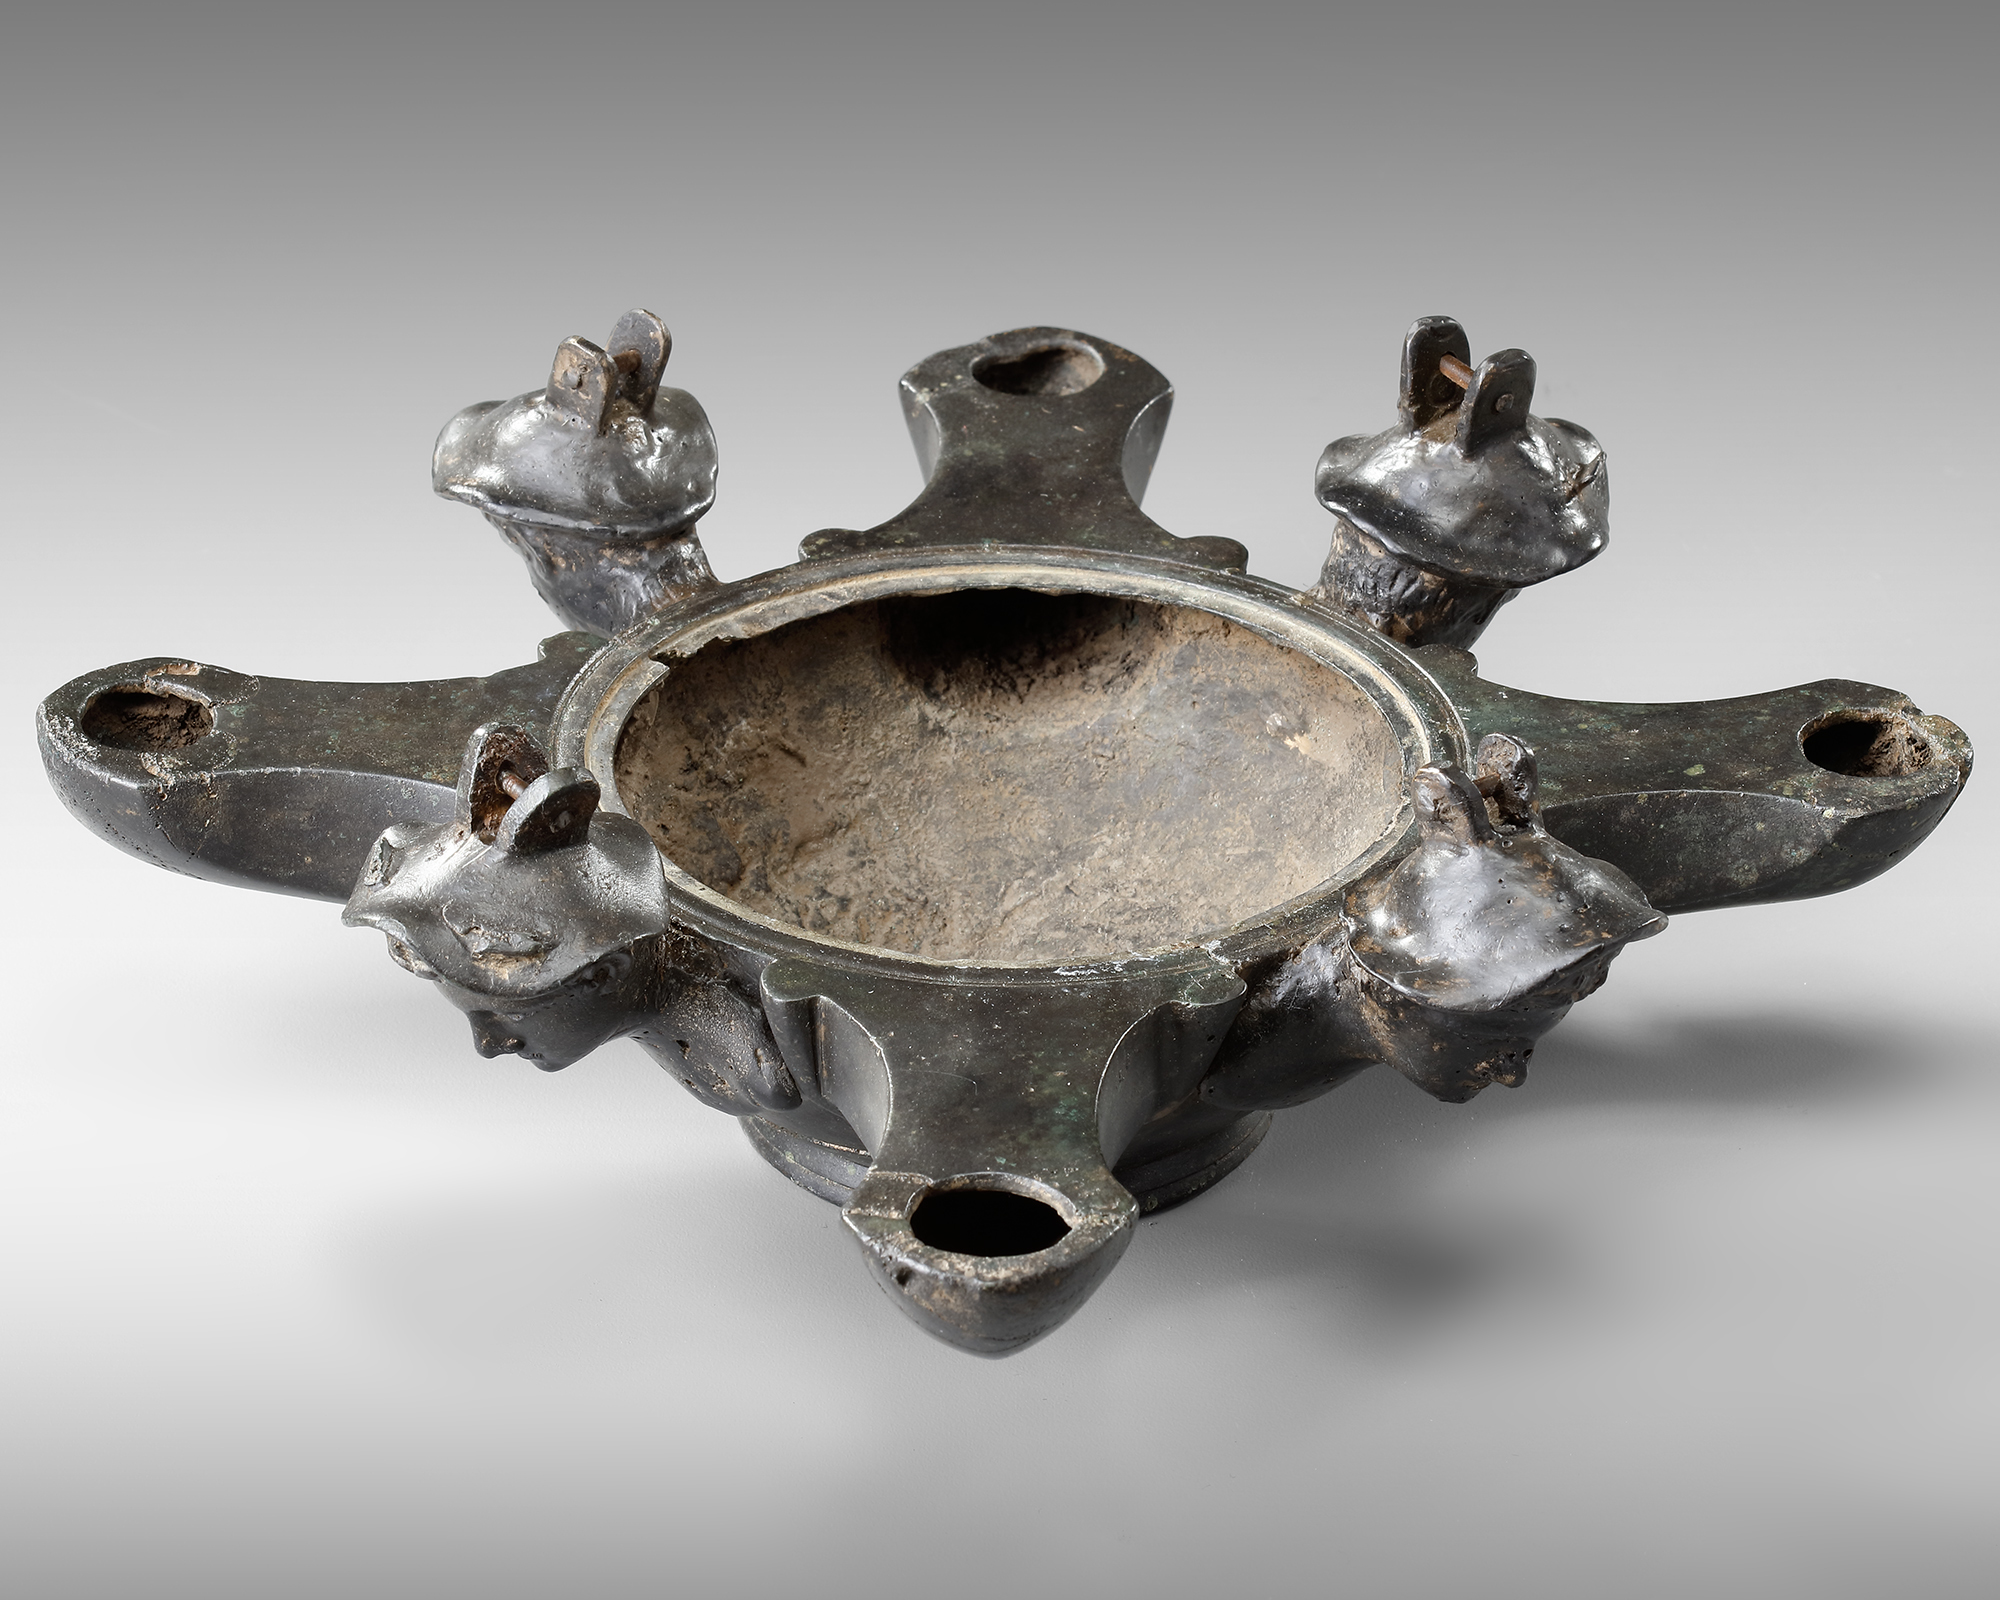 A ROMAN BRONZE OIL LAMP WITH FOUR SPOUTS AND BUSTS OF MERCURY, CIRCA 1ST-2ND CENTURY A.D - Image 2 of 5